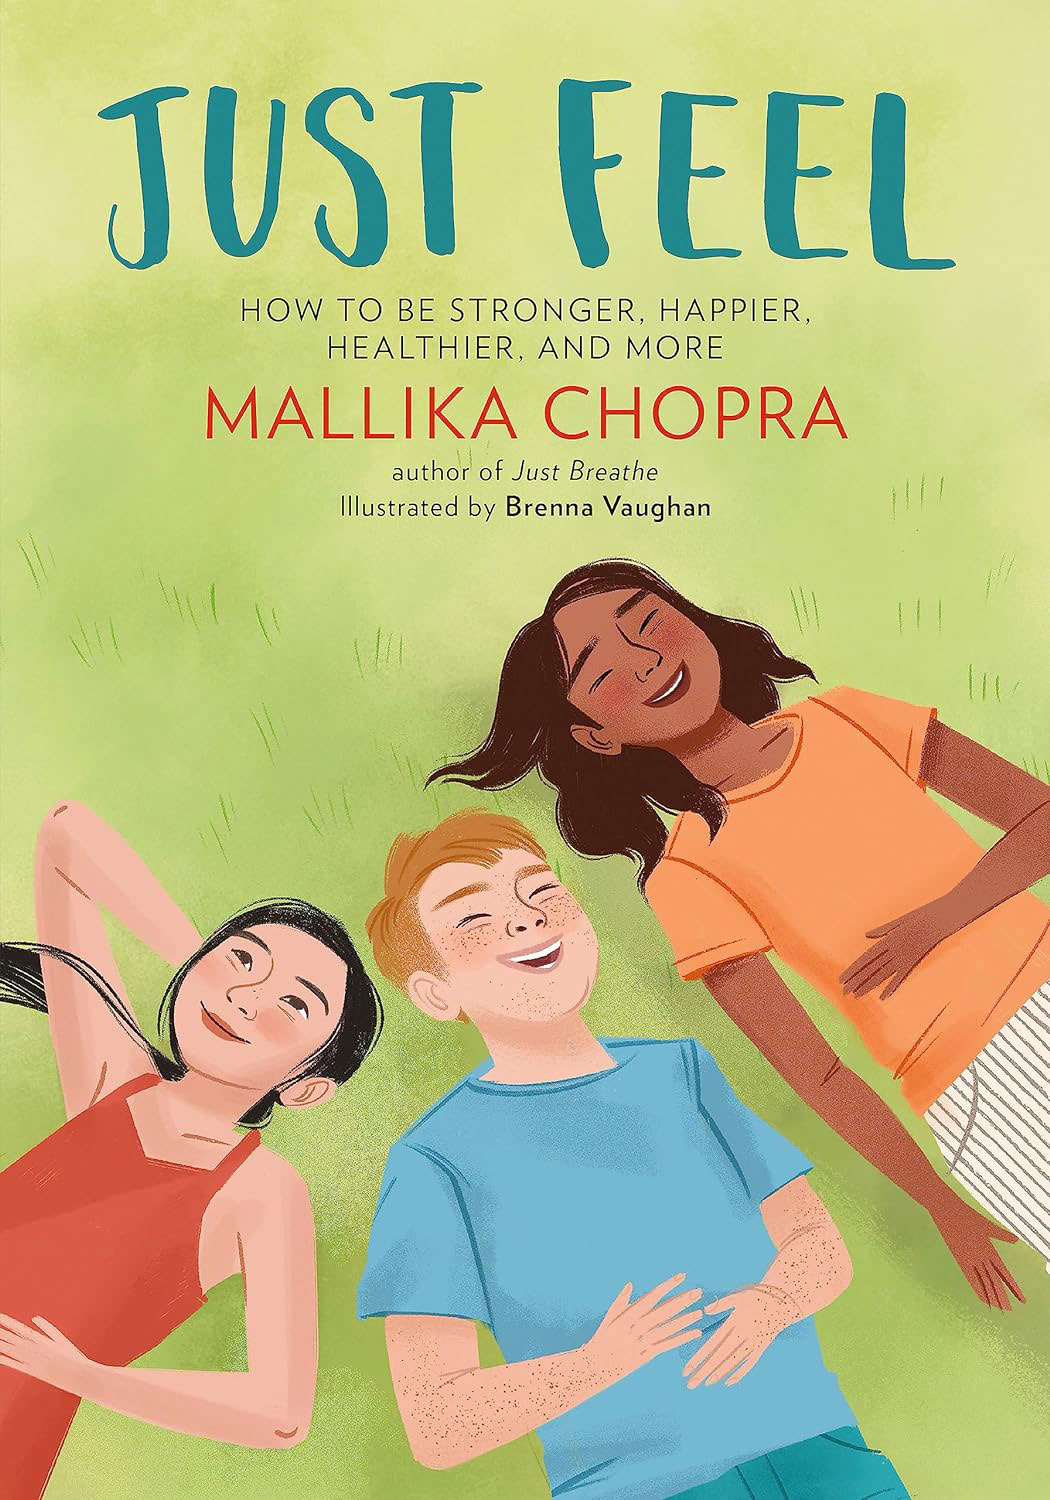 Just Feel: How to Be Stronger, Happier, Healthier, and More